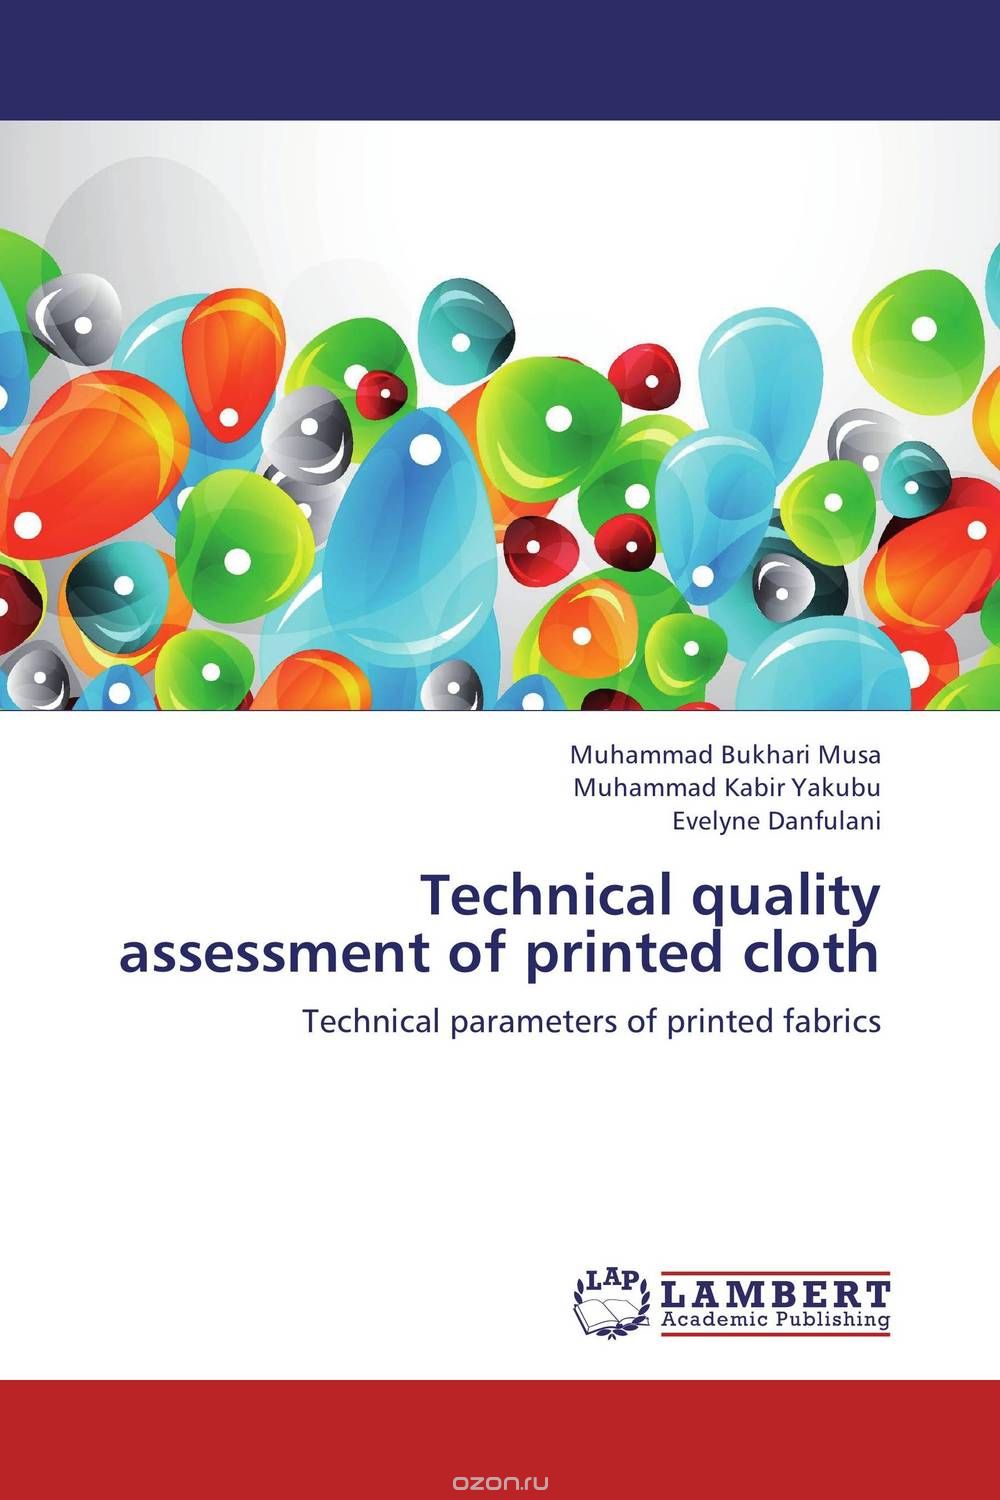 Technical quality assessment of printed cloth